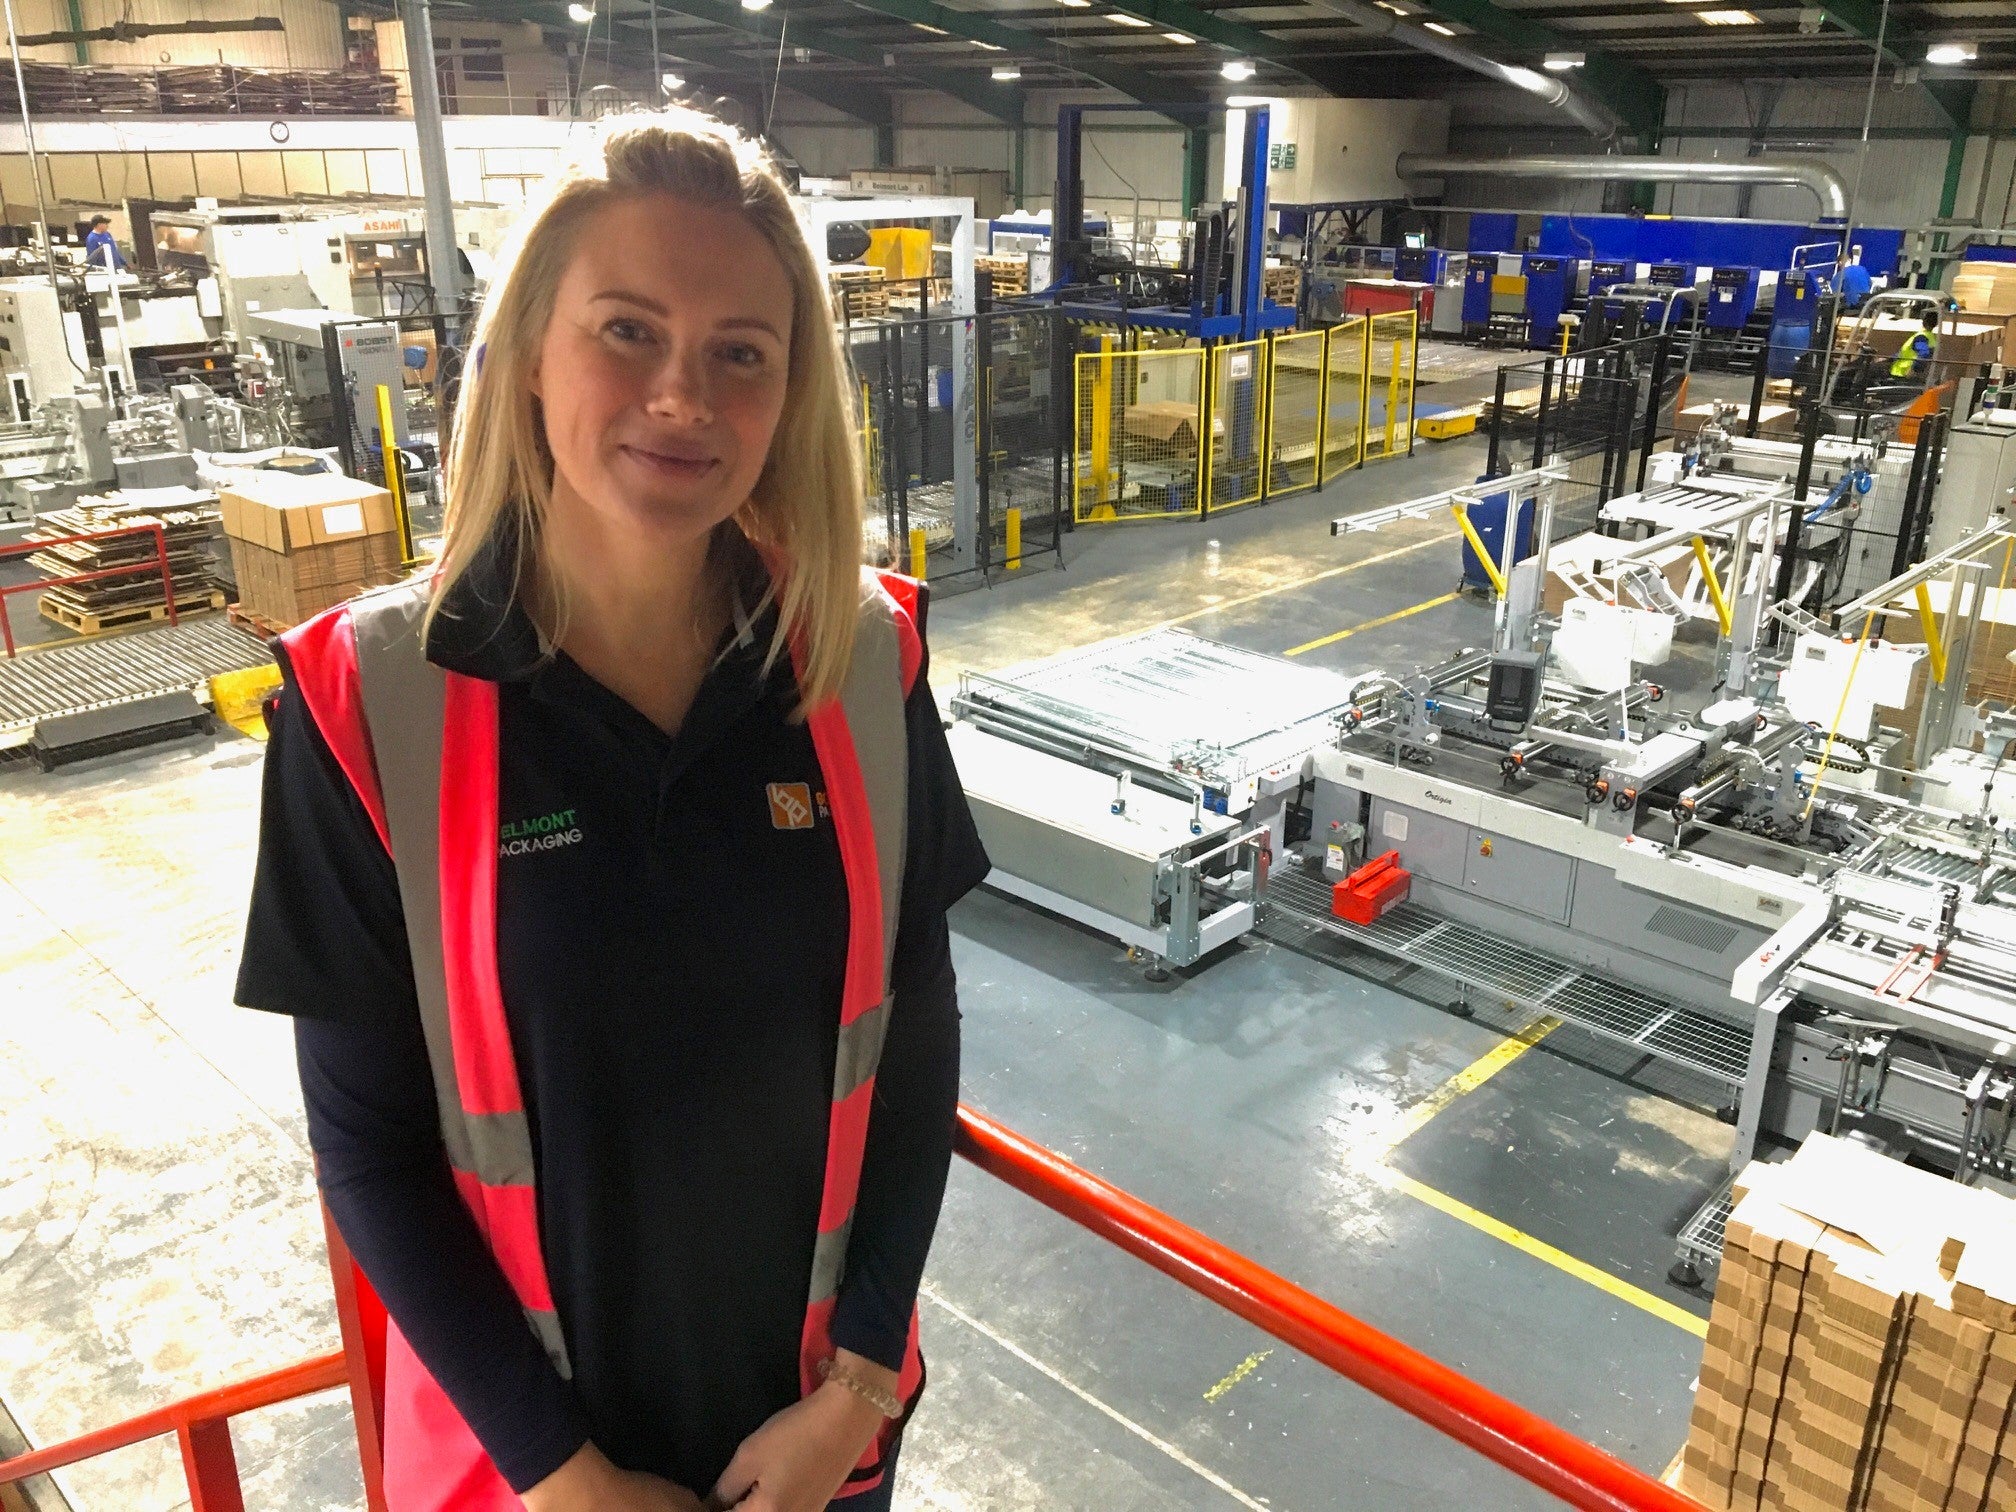 Kate Hulley, the owner of Belmont Packaging, says productivity soared after the four-day week was introduced